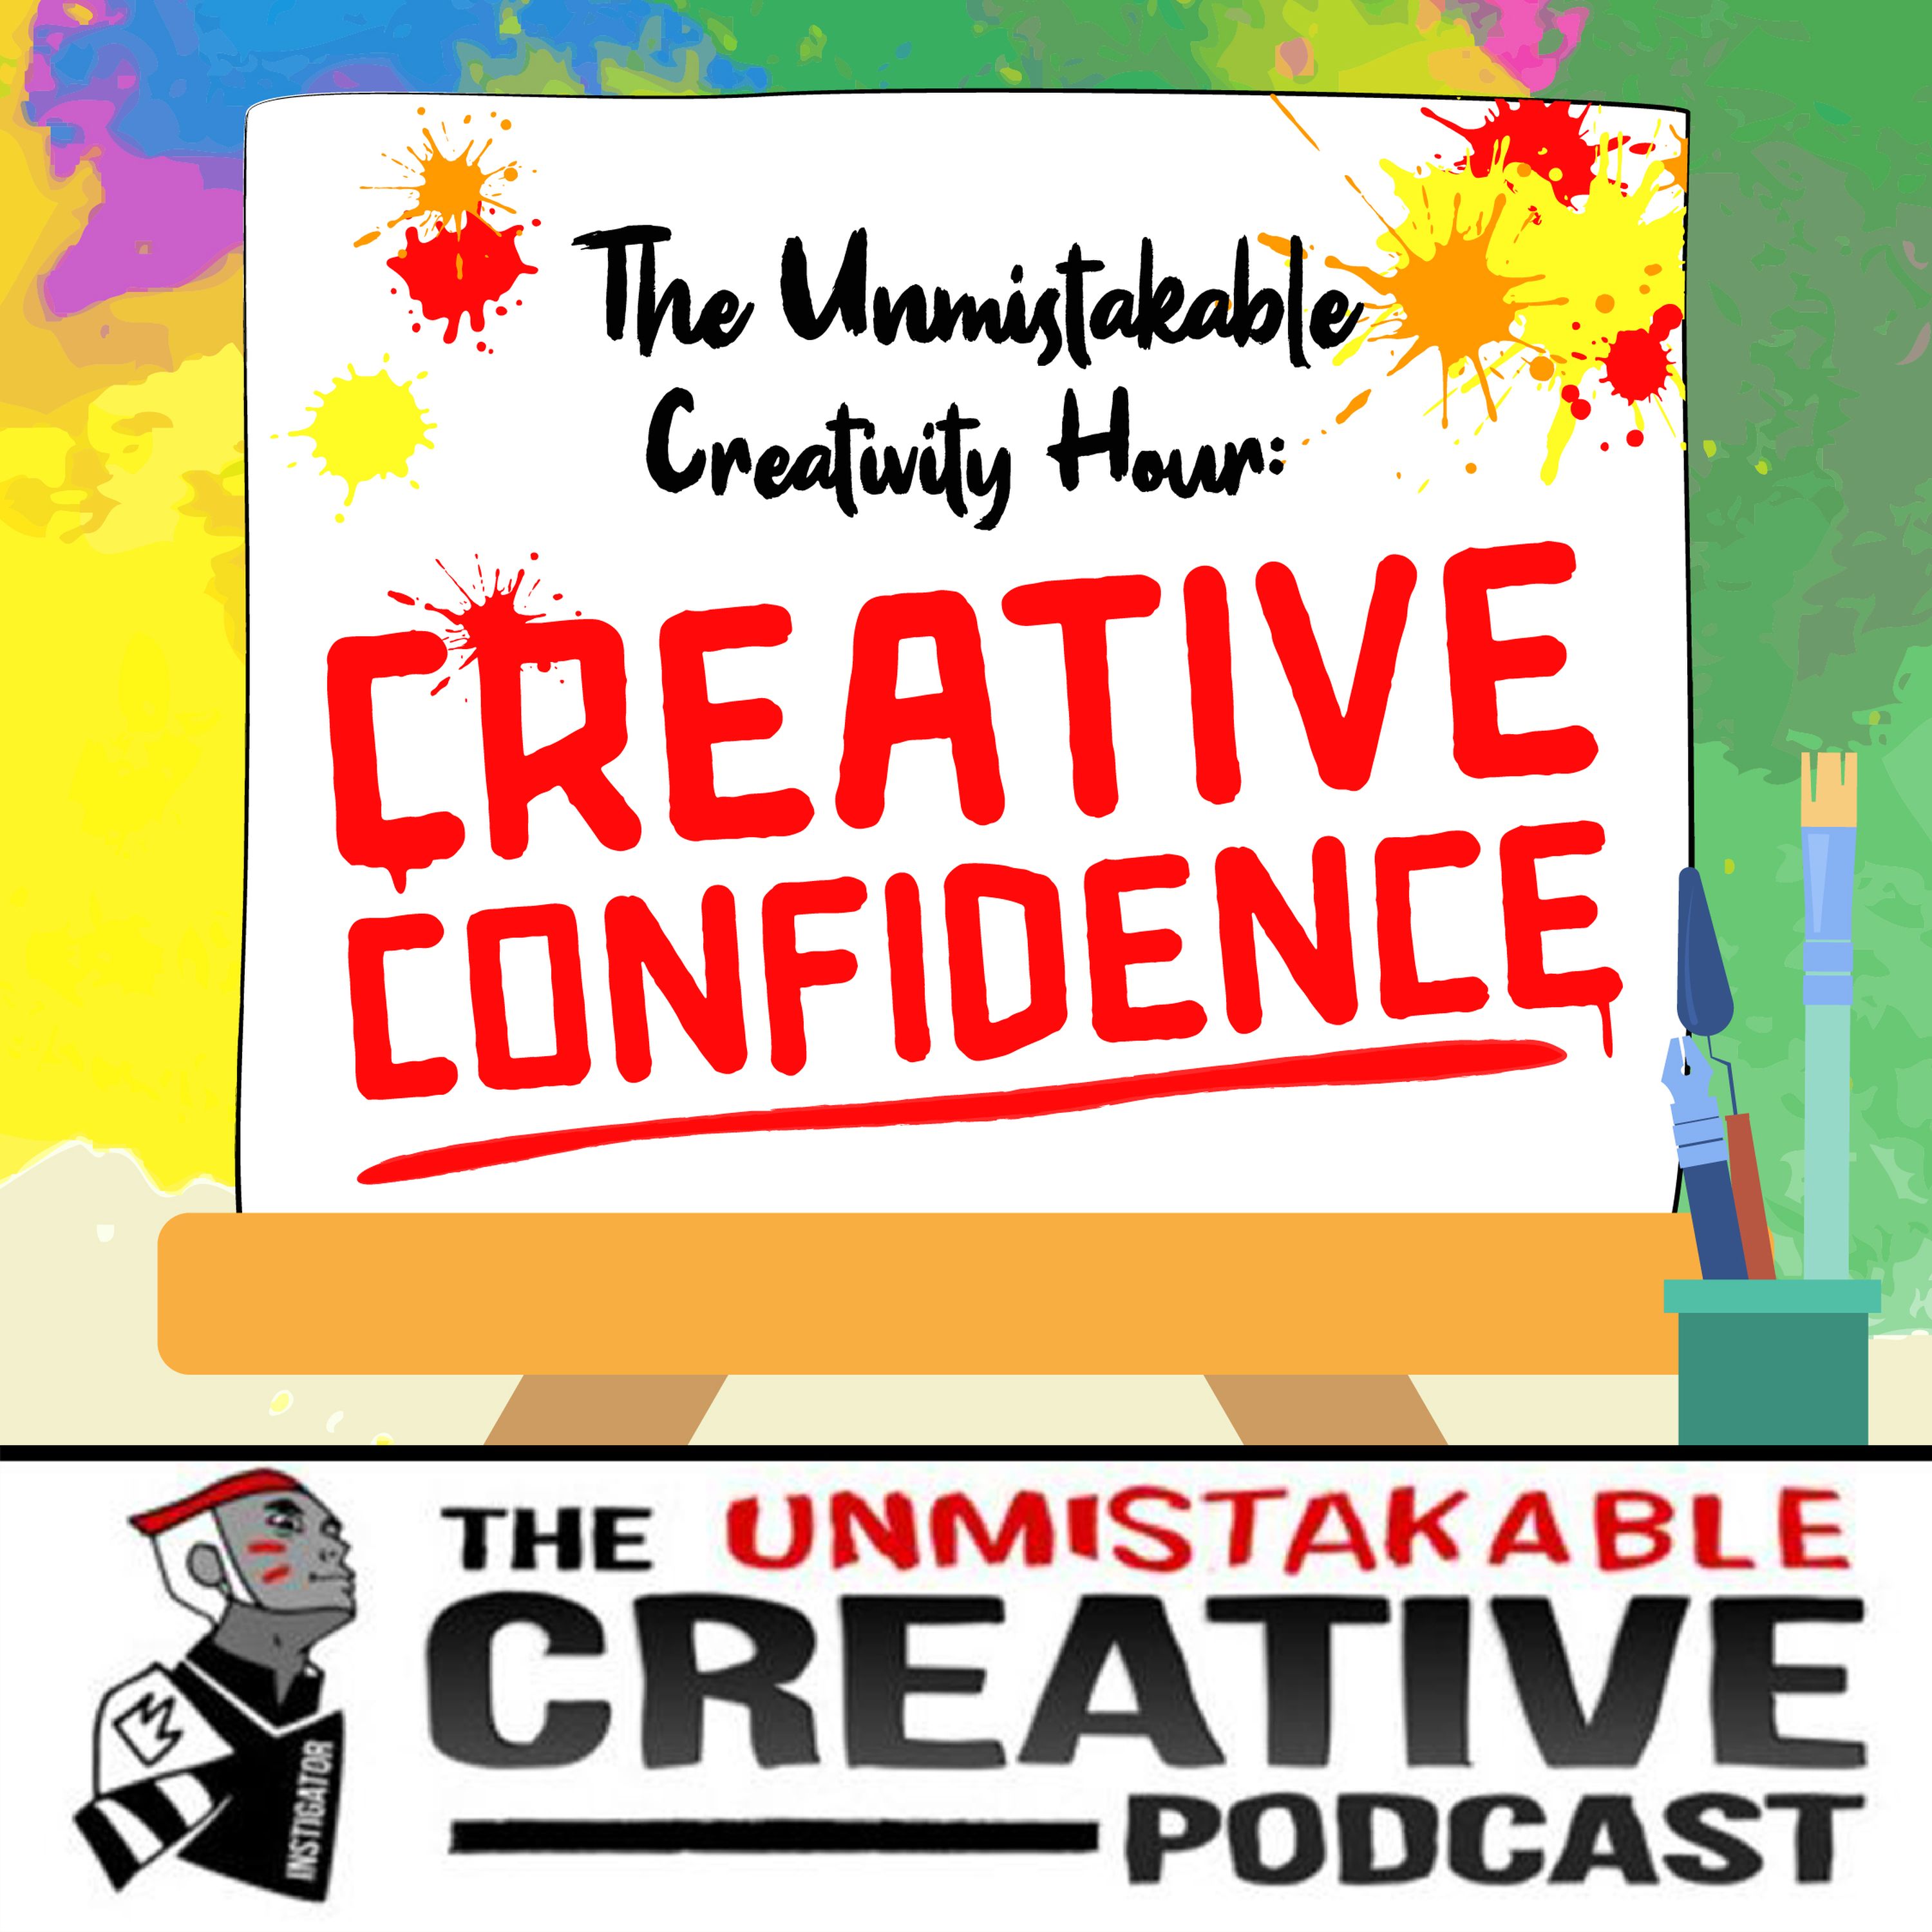 The Unmistakable Creativity Hour Image